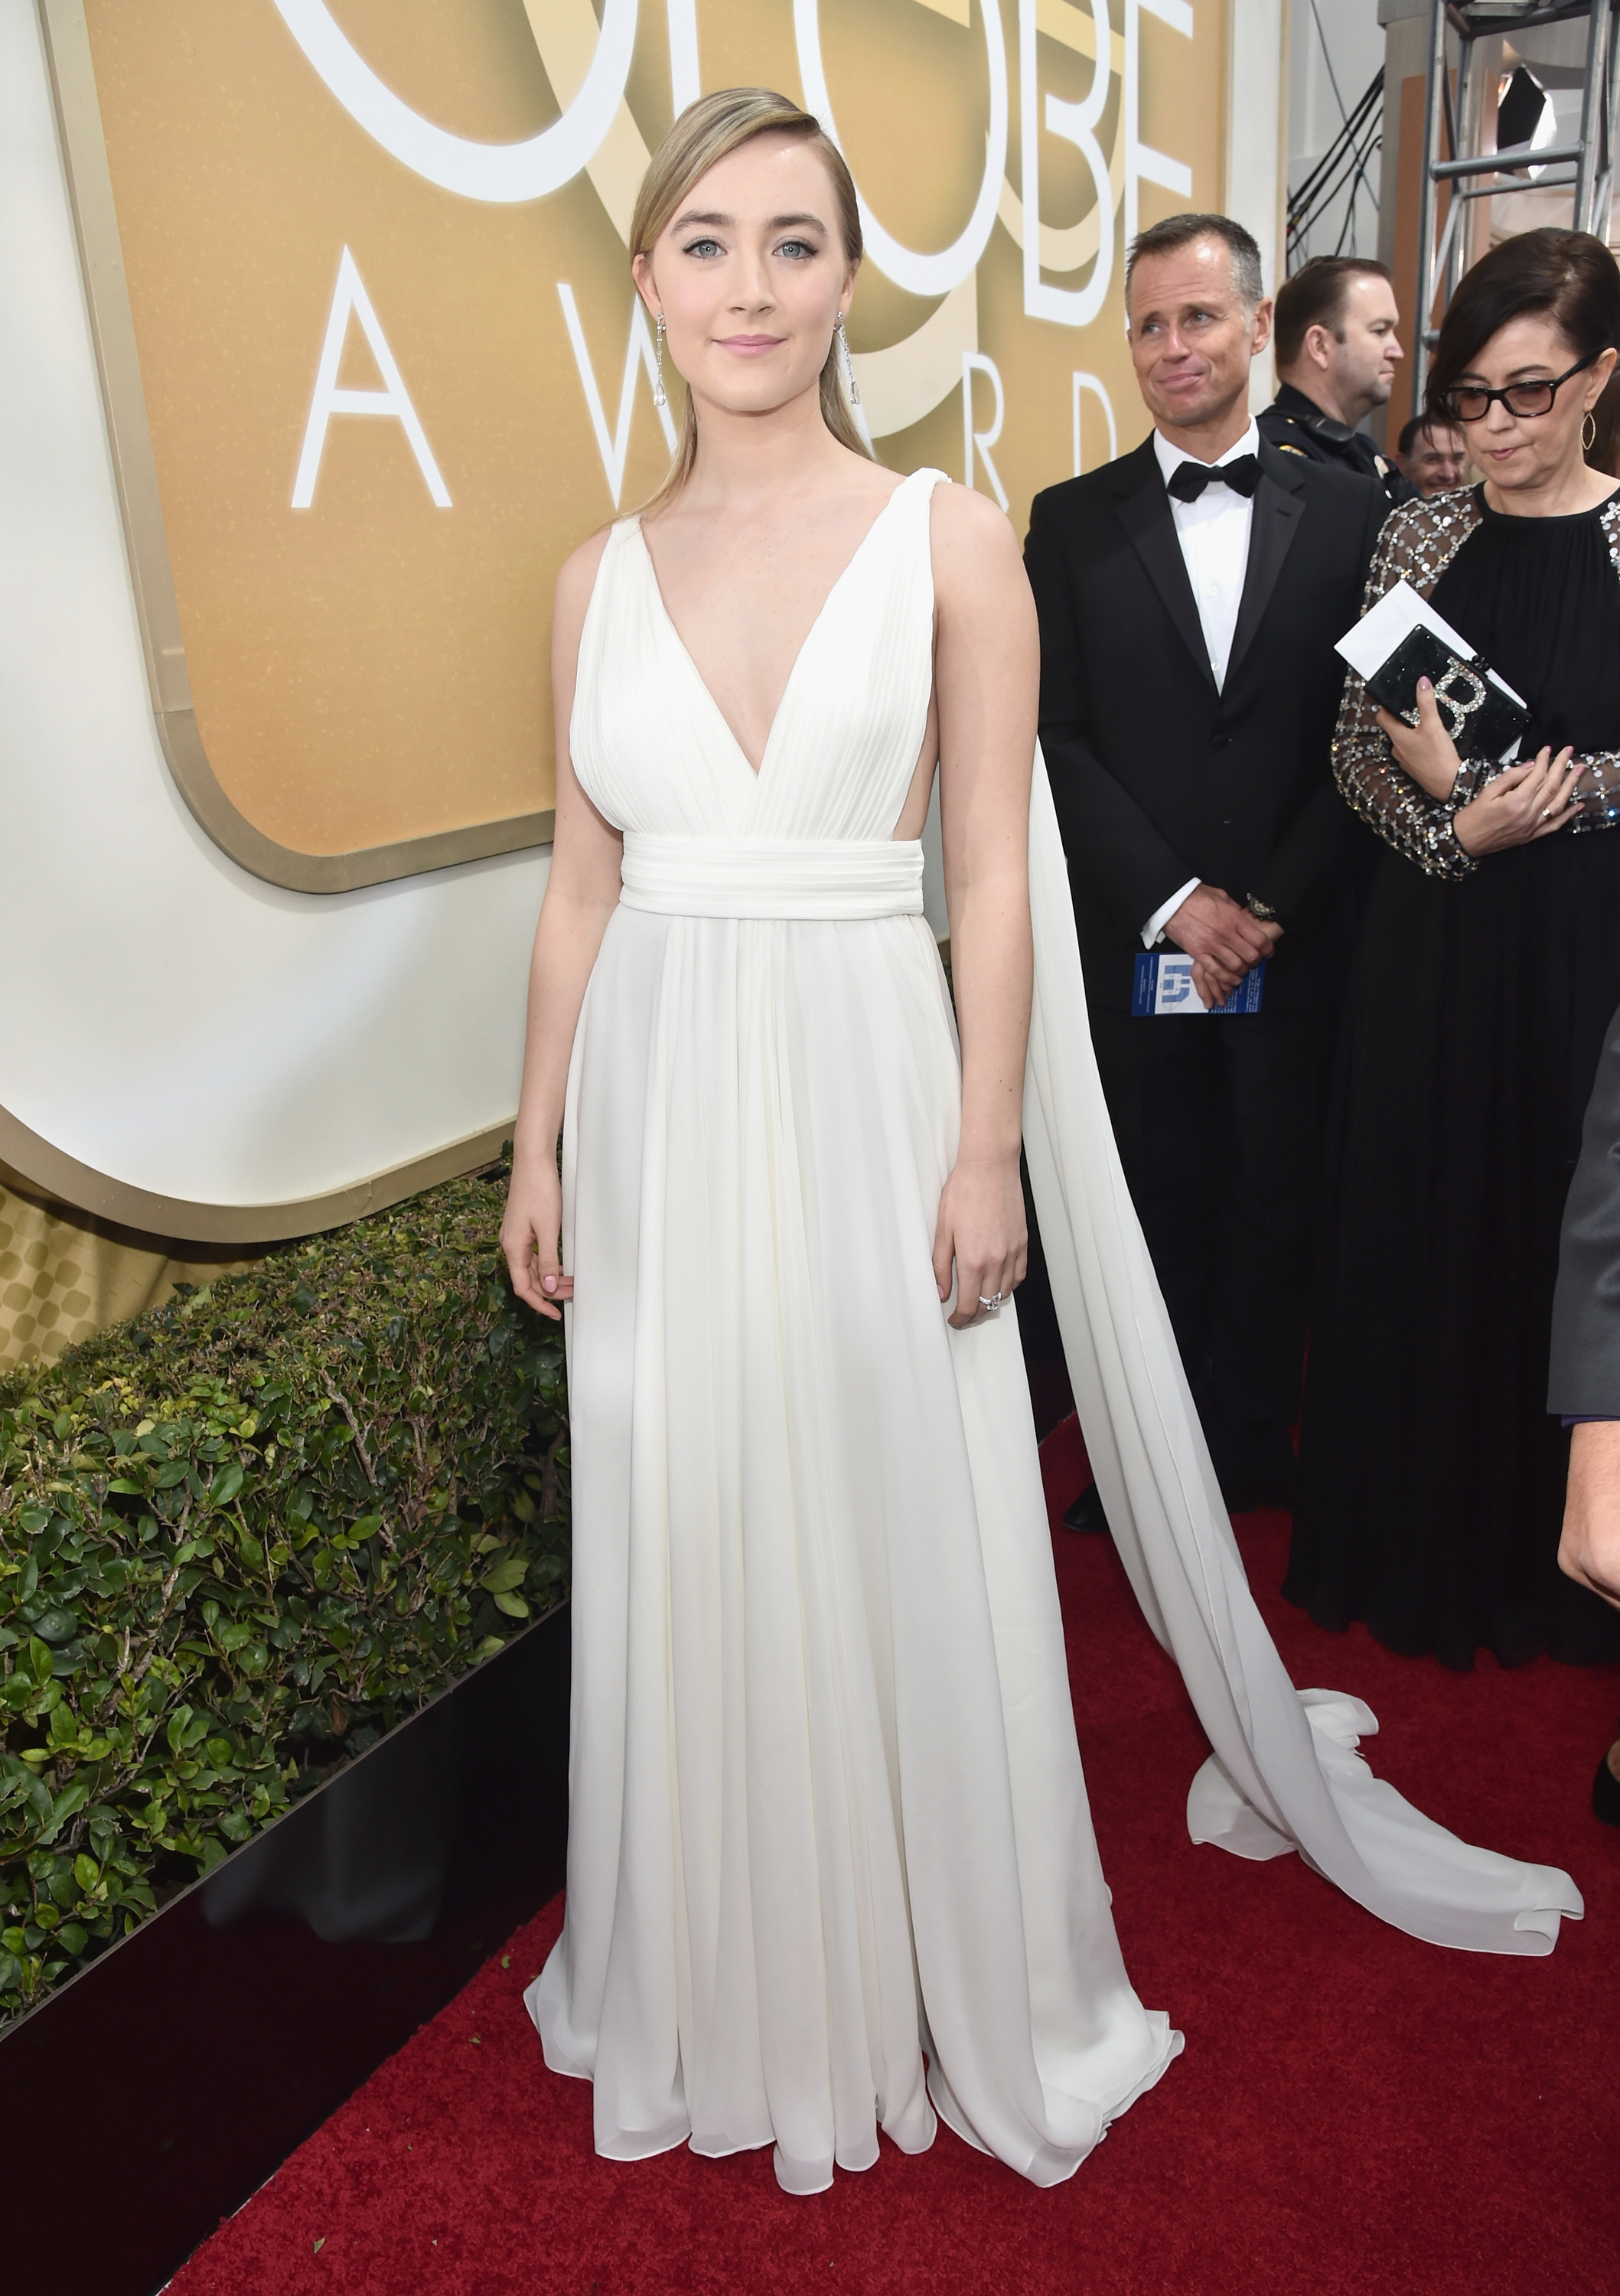 Saoirse Ronan arrives to the 73rd Annual Golden Globe Awards on Jan. 10, 2016 in Beverly Hills.